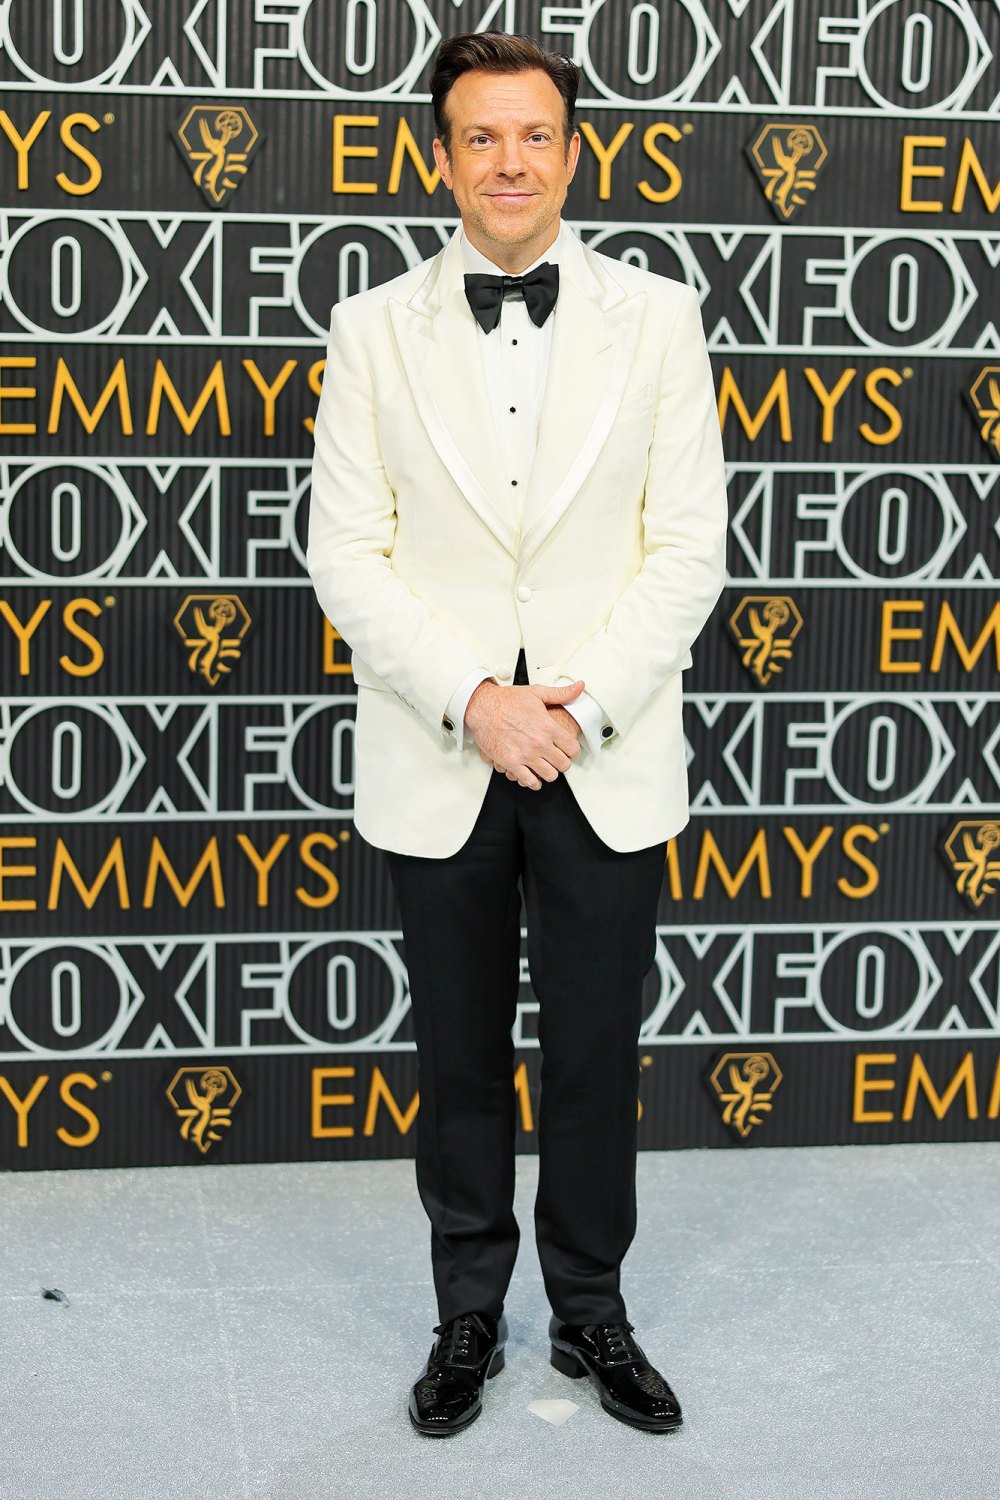 Jason Sudeikis is Classy in a White Tuxedo at 2023 Emmys